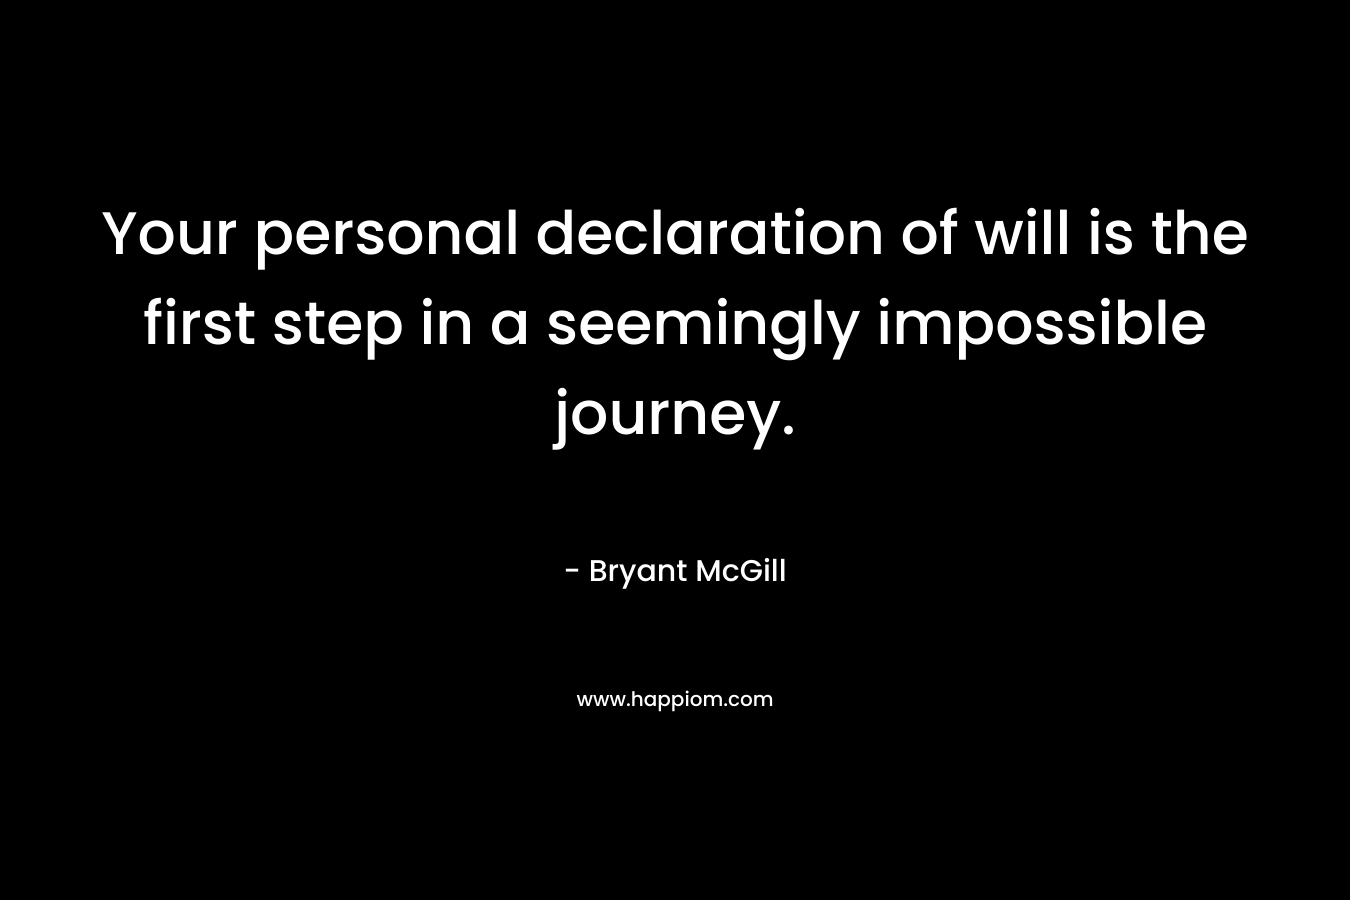 Your personal declaration of will is the first step in a seemingly impossible journey.